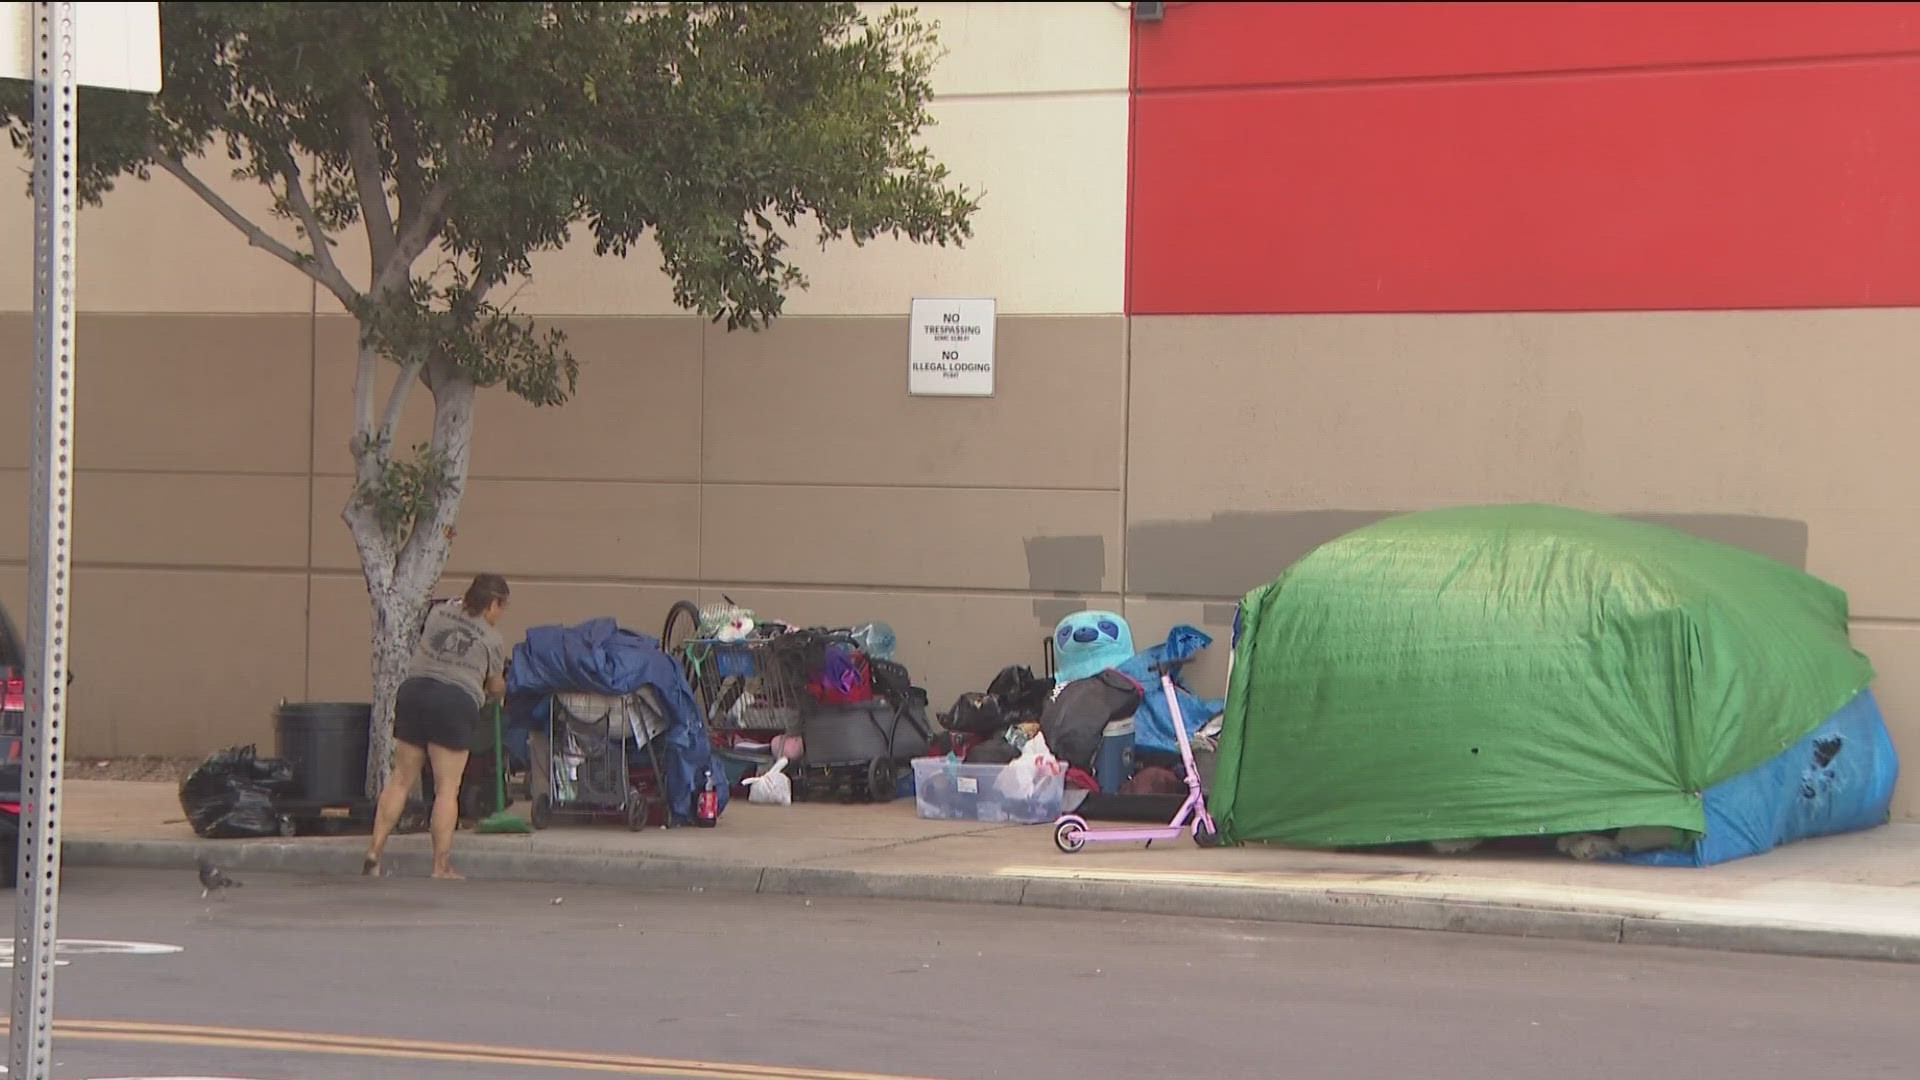 This would be a similar ordinance to the one the city of San Diego passed earlier this year on unsafe camping.